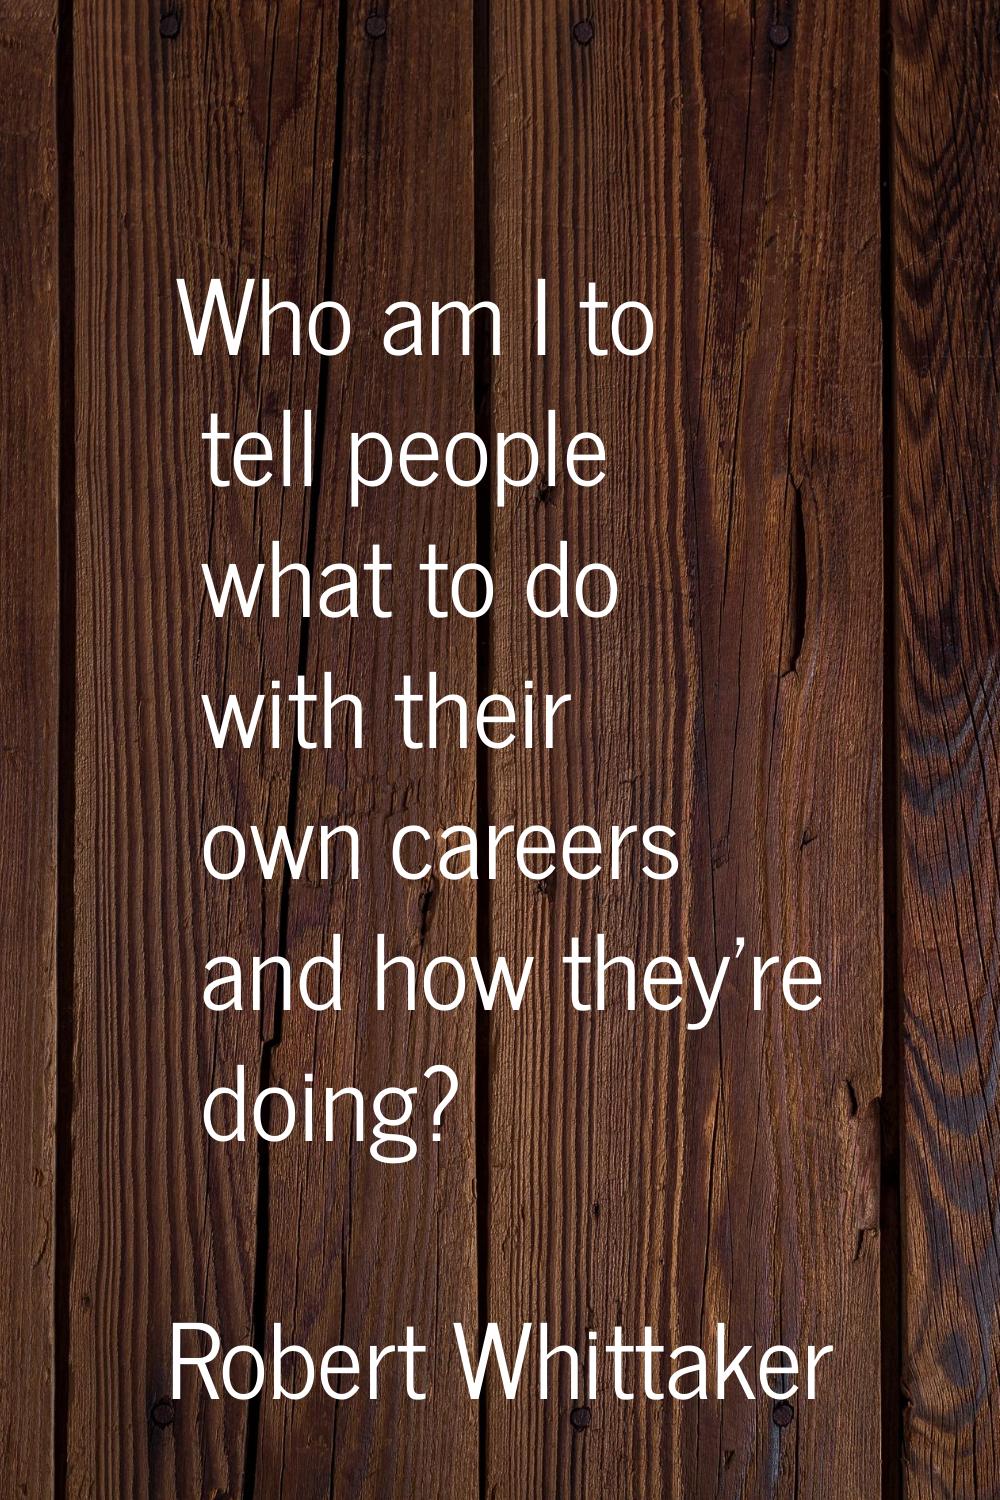 Who am I to tell people what to do with their own careers and how they're doing?